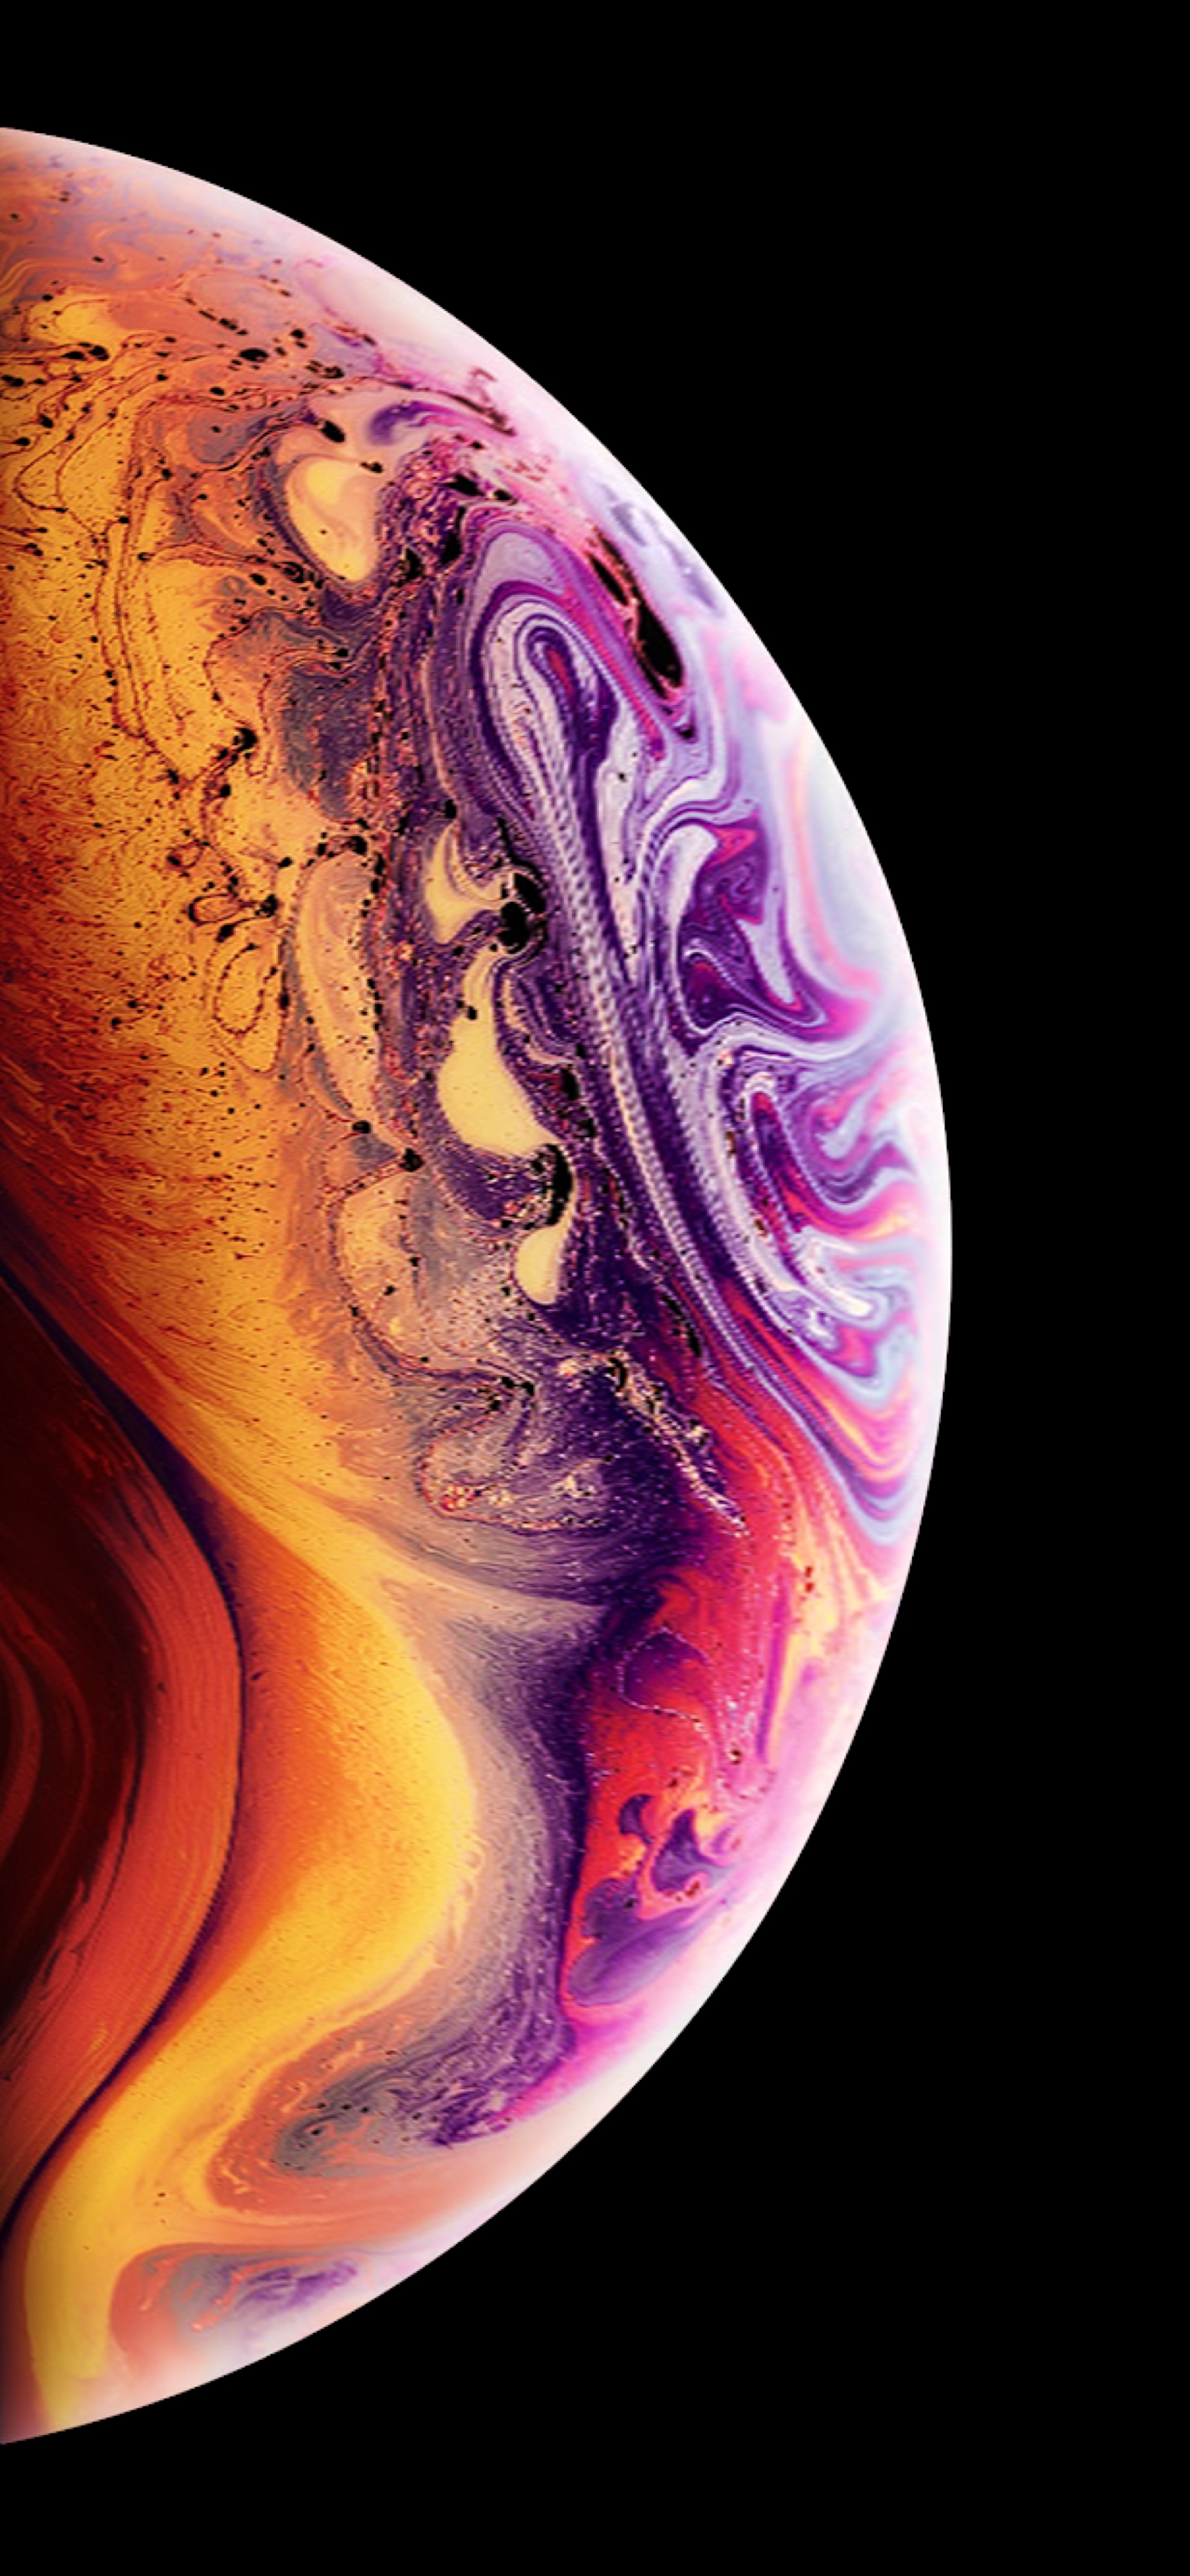 Iphone Xs Wallpaper For Iphone X And Xs Iphone Iphone Xs 初期 壁紙 12x4096 Wallpaper Teahub Io